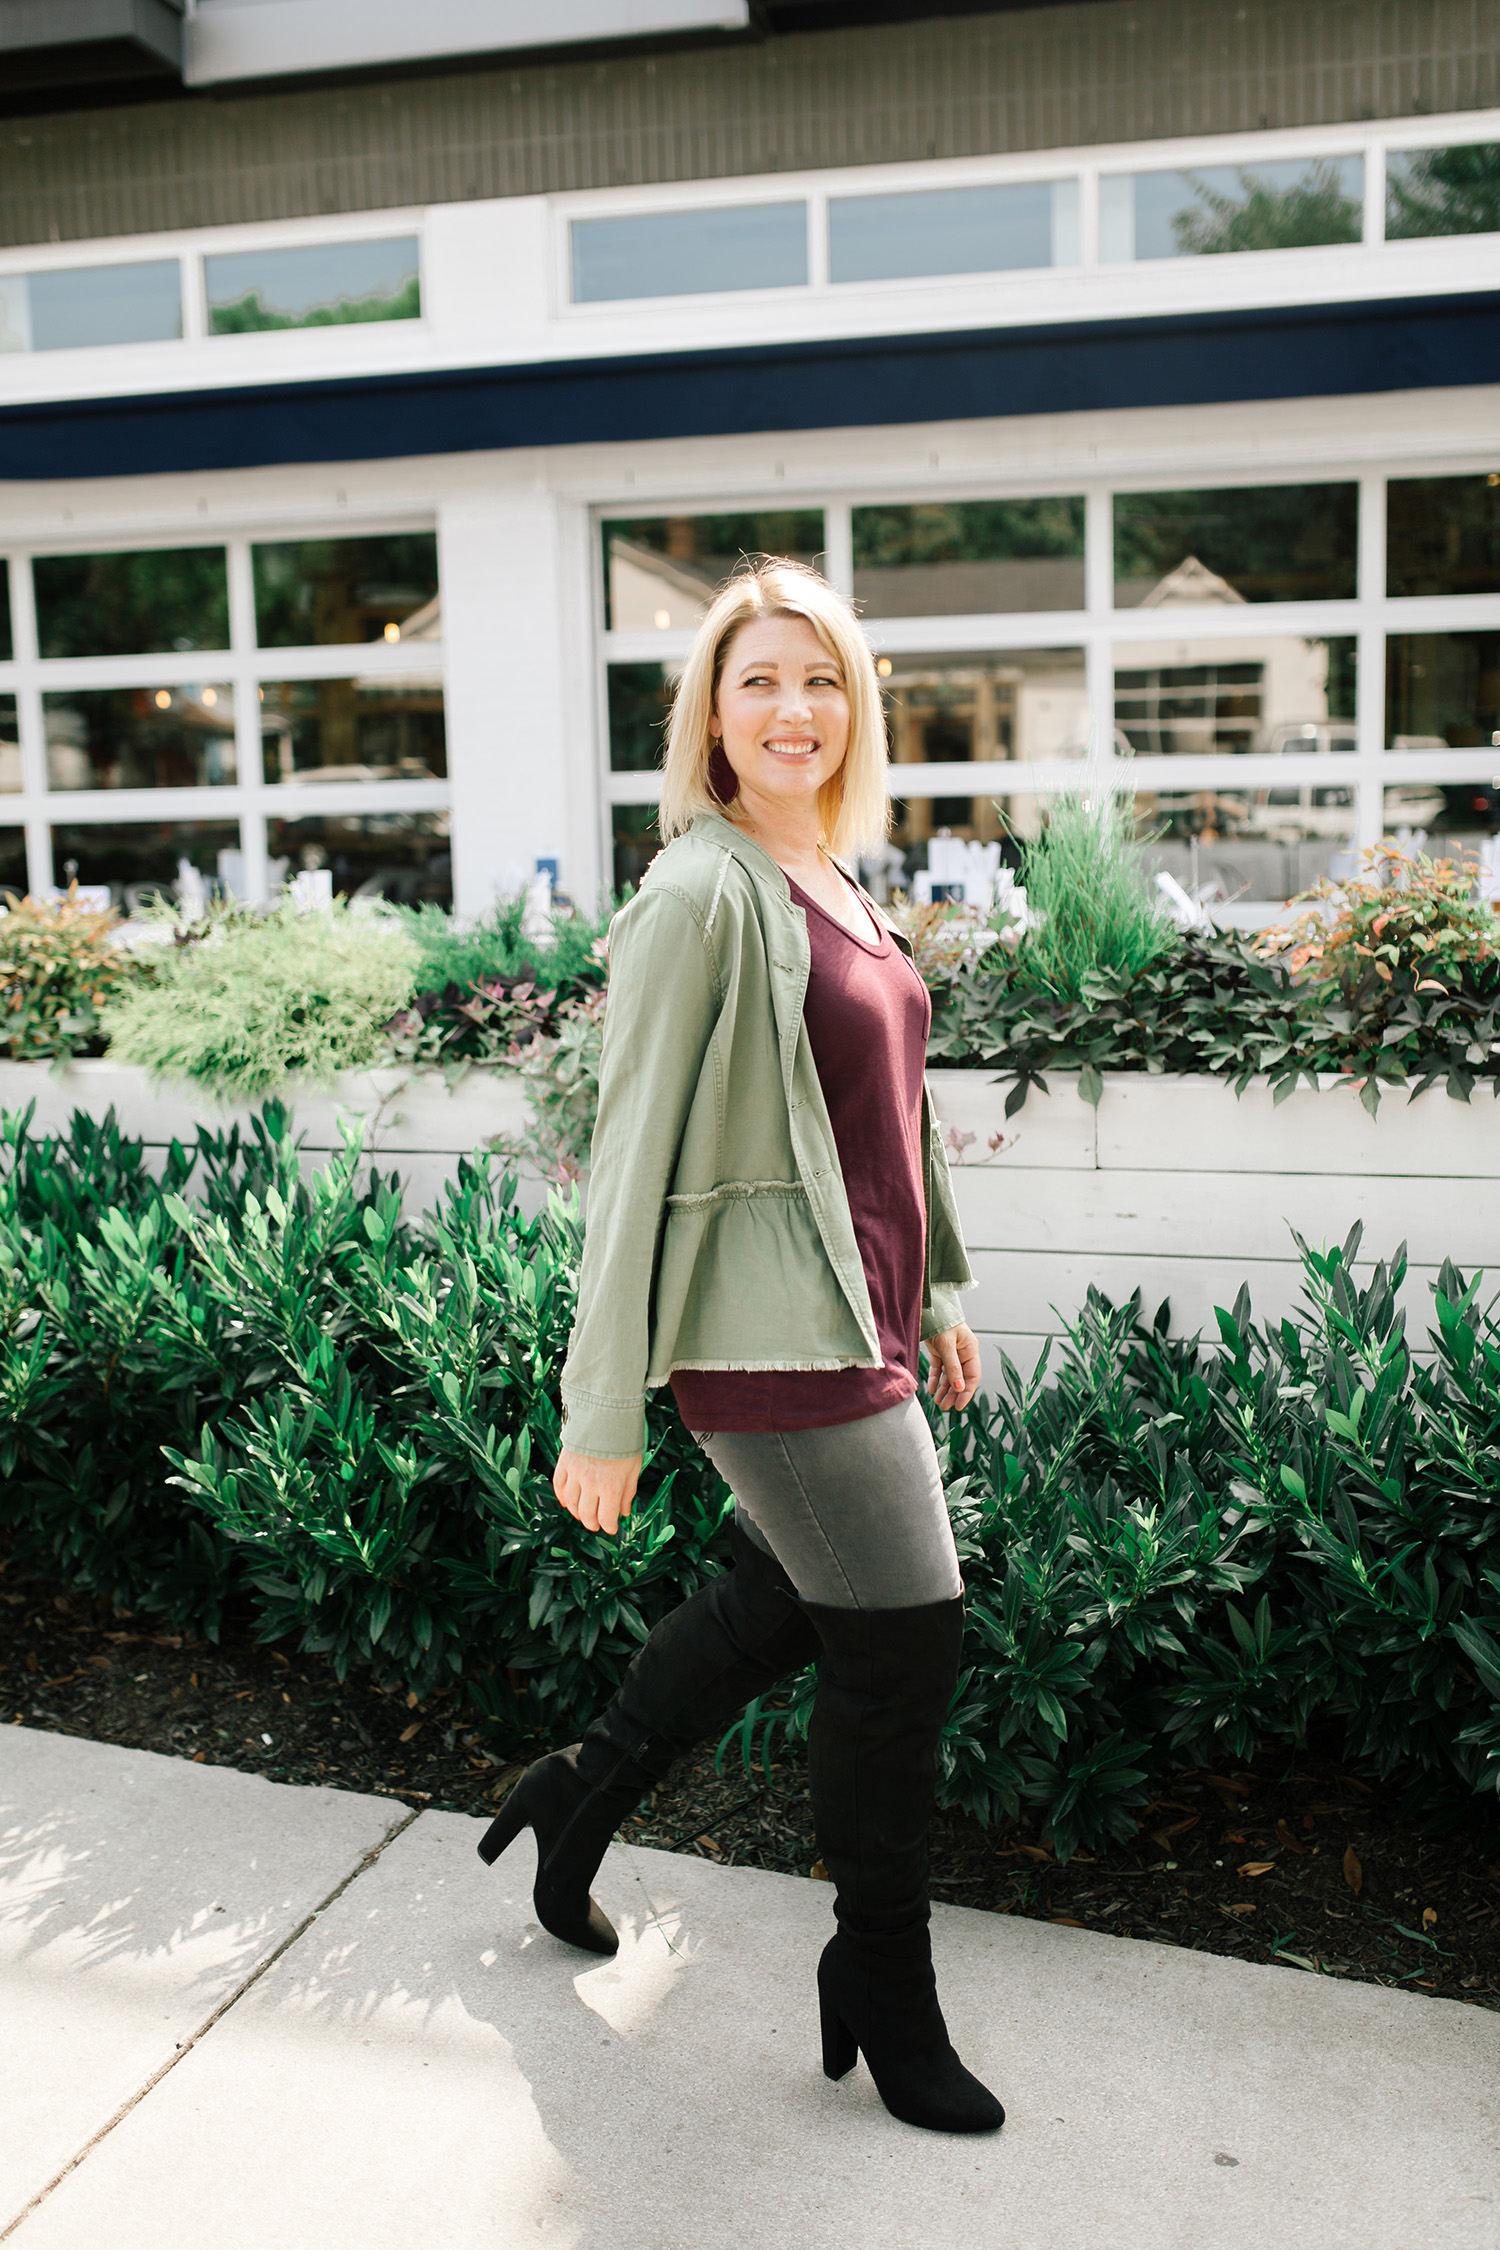 Looking for fall fashion ideas? Lifestyle blogger Carly of Lipgloss & Crayons shares this peplum jacket that is PERFECT for casual fall outfits!